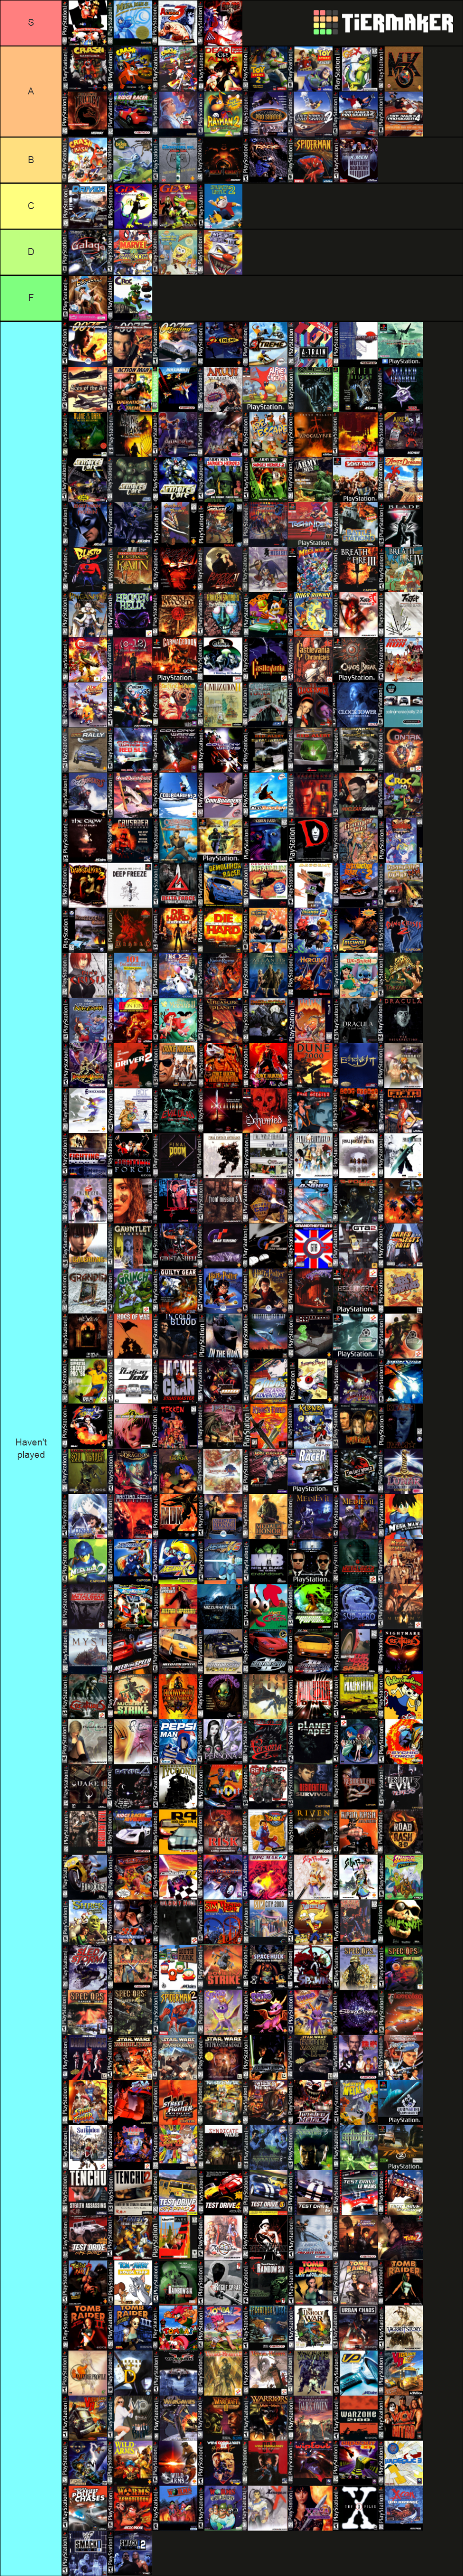 PlayStation One Games Poster by MrYoshi1996 on DeviantArt